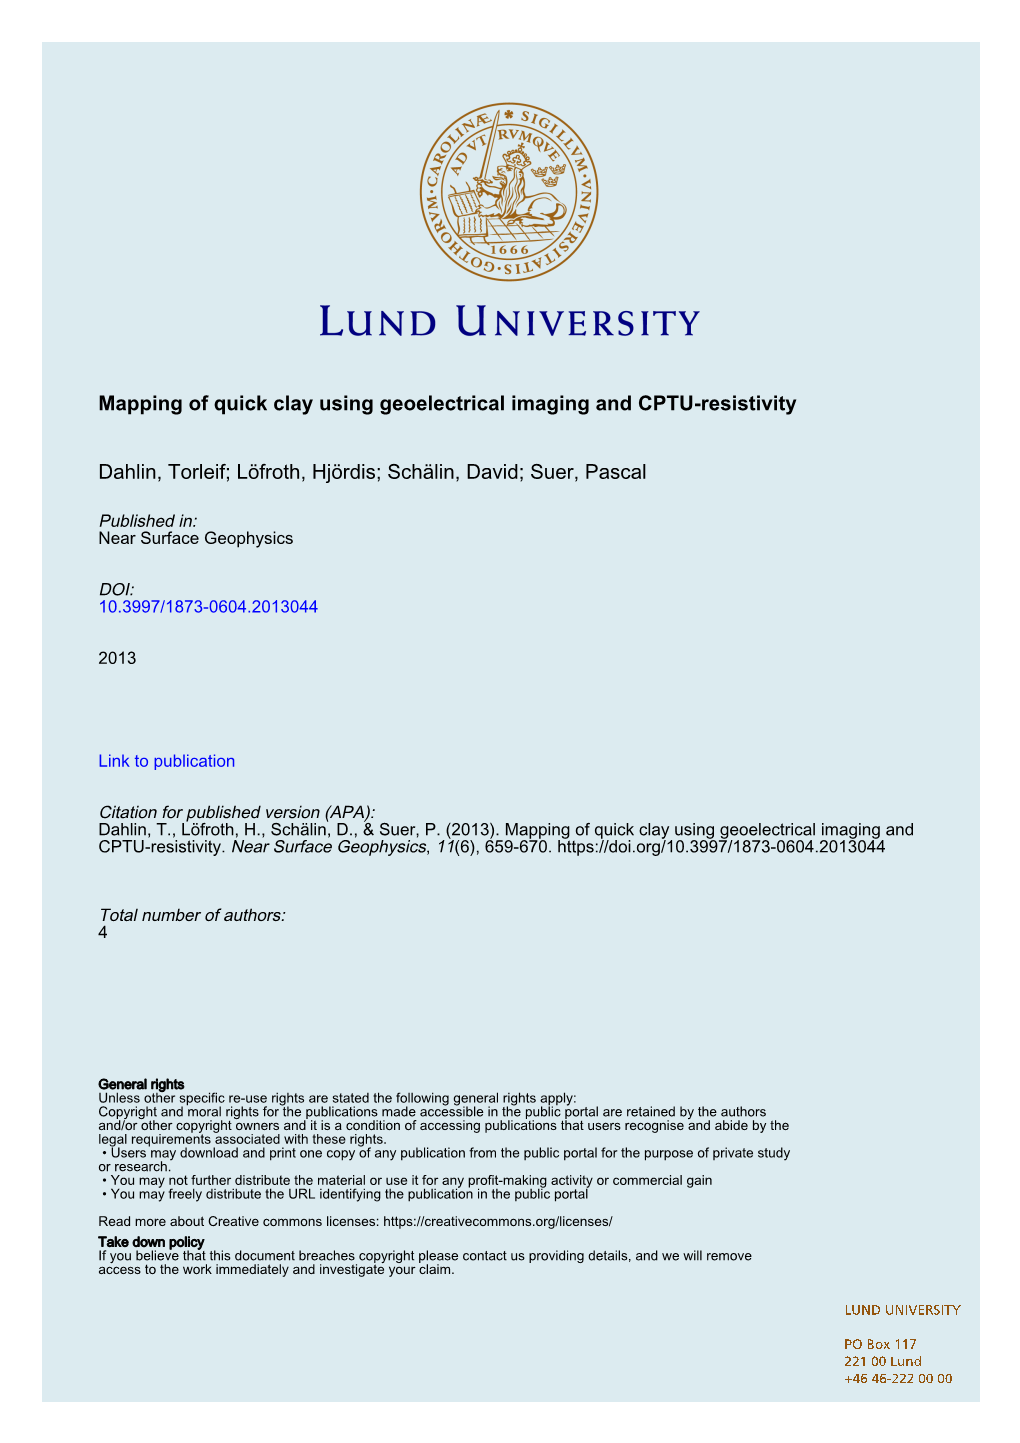 Mapping of Quick Clay Using Geoelectrical Imaging and CPTU-Resistivity